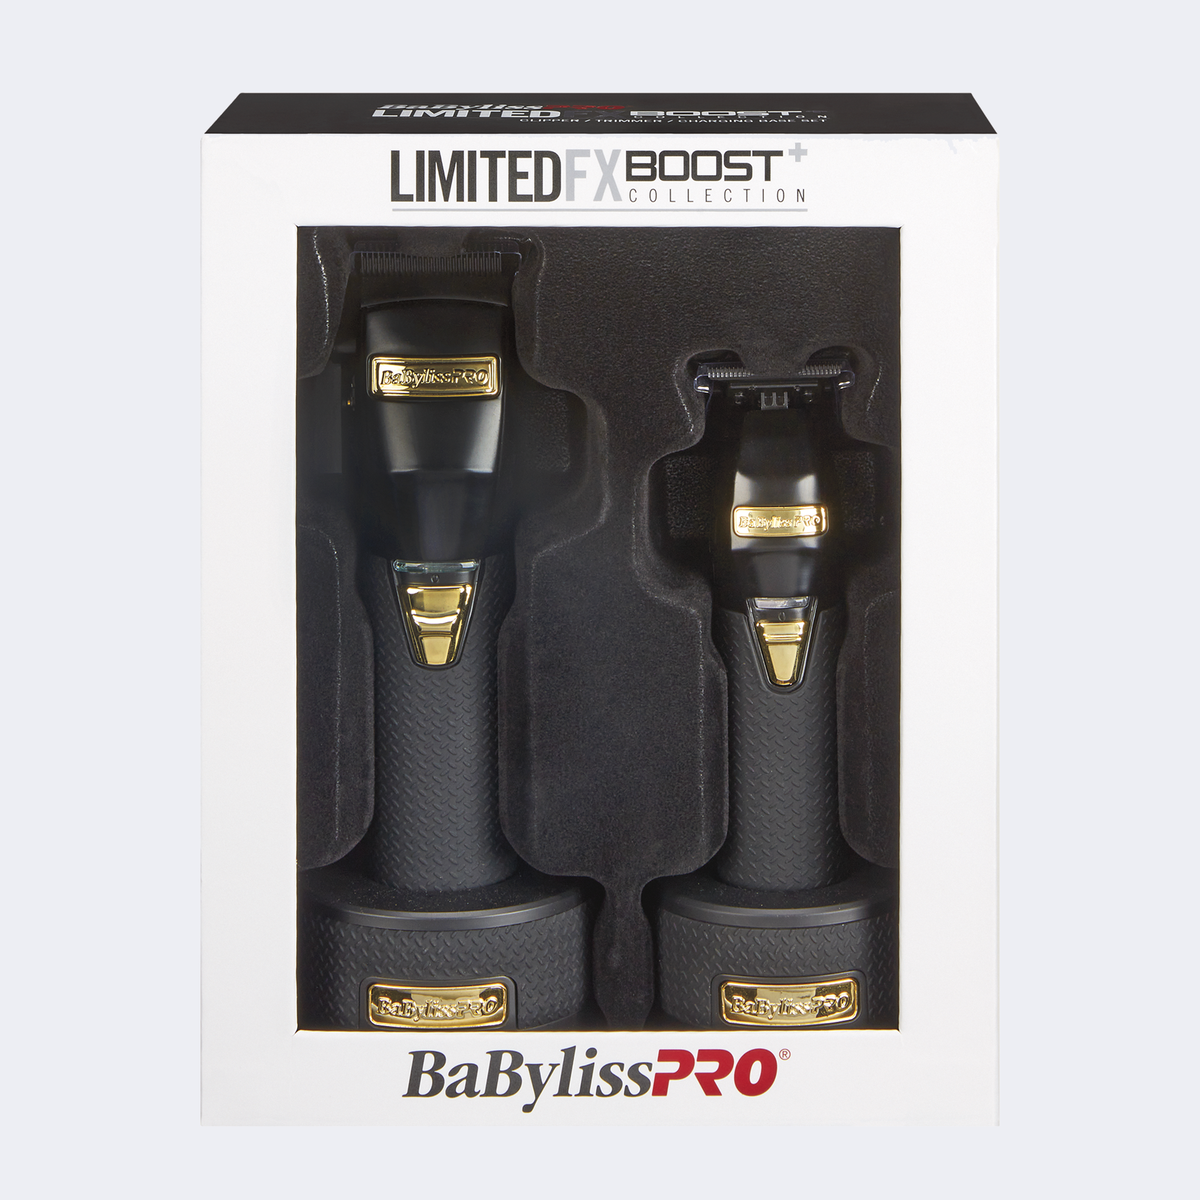 BaBylissPRO® LimitedFX Boost+ Collection with Clipper, Trimmer & Charging Base Set - Black